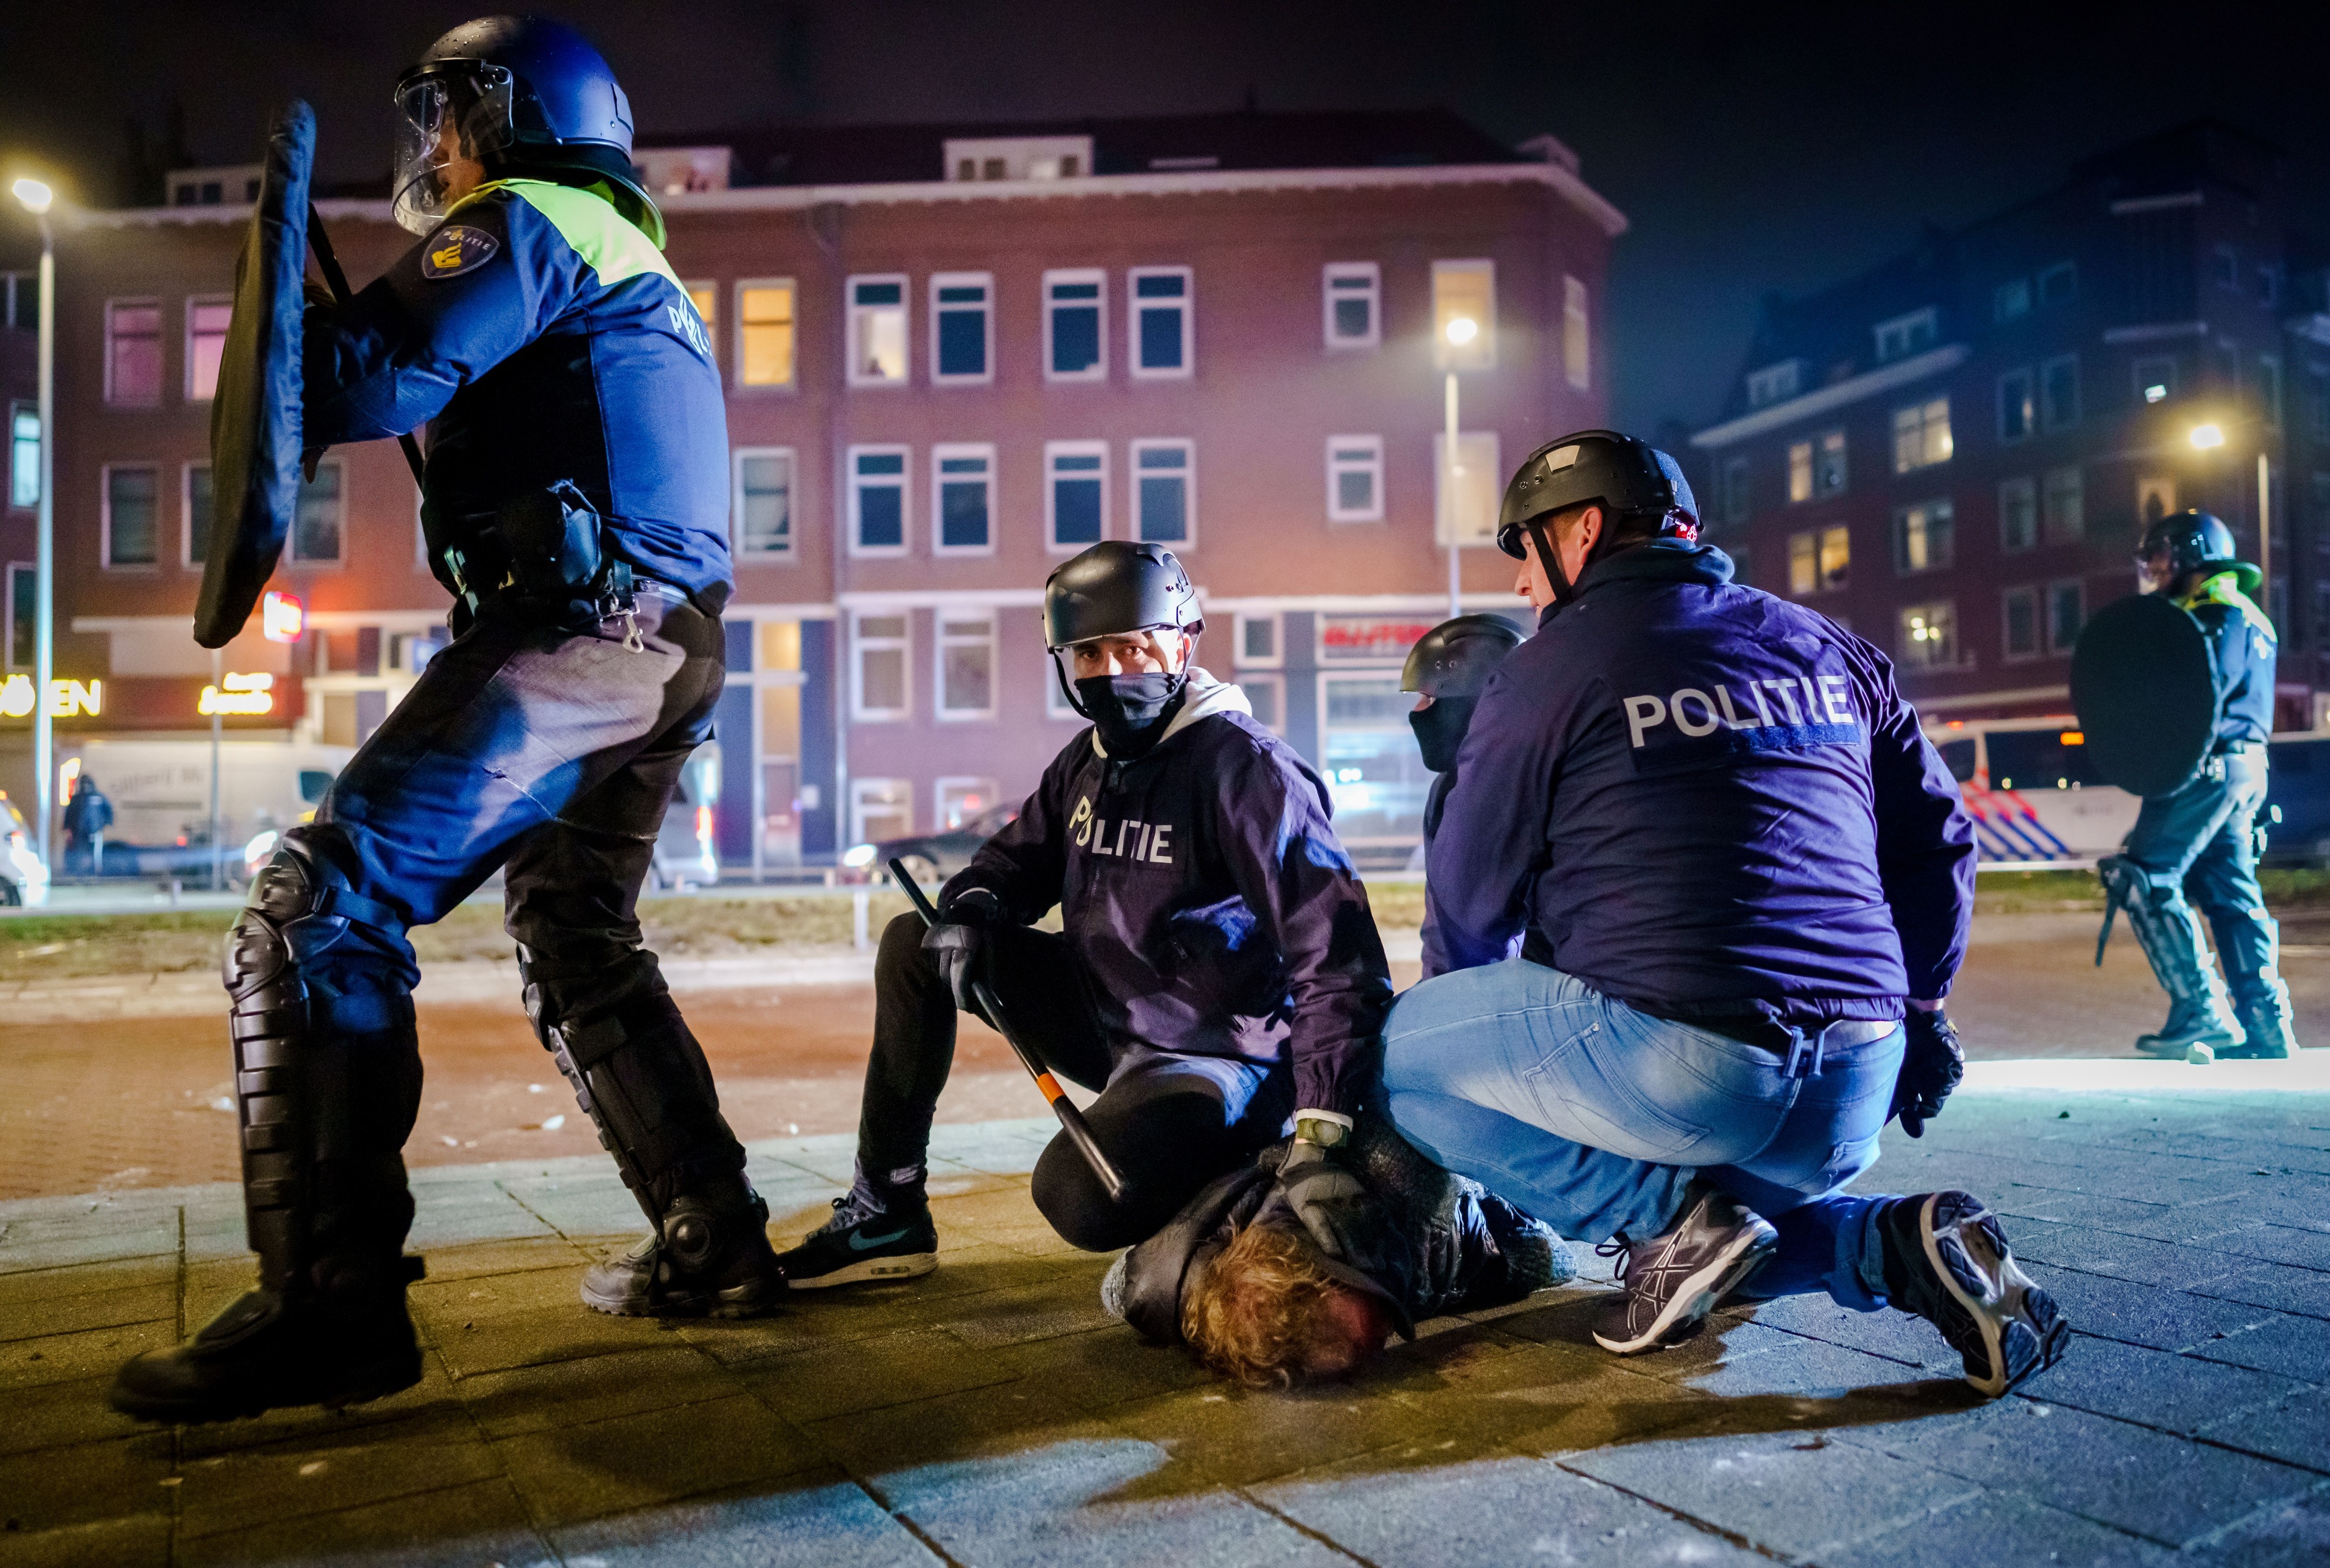 Photo of riot police holding a protester face down in the ground